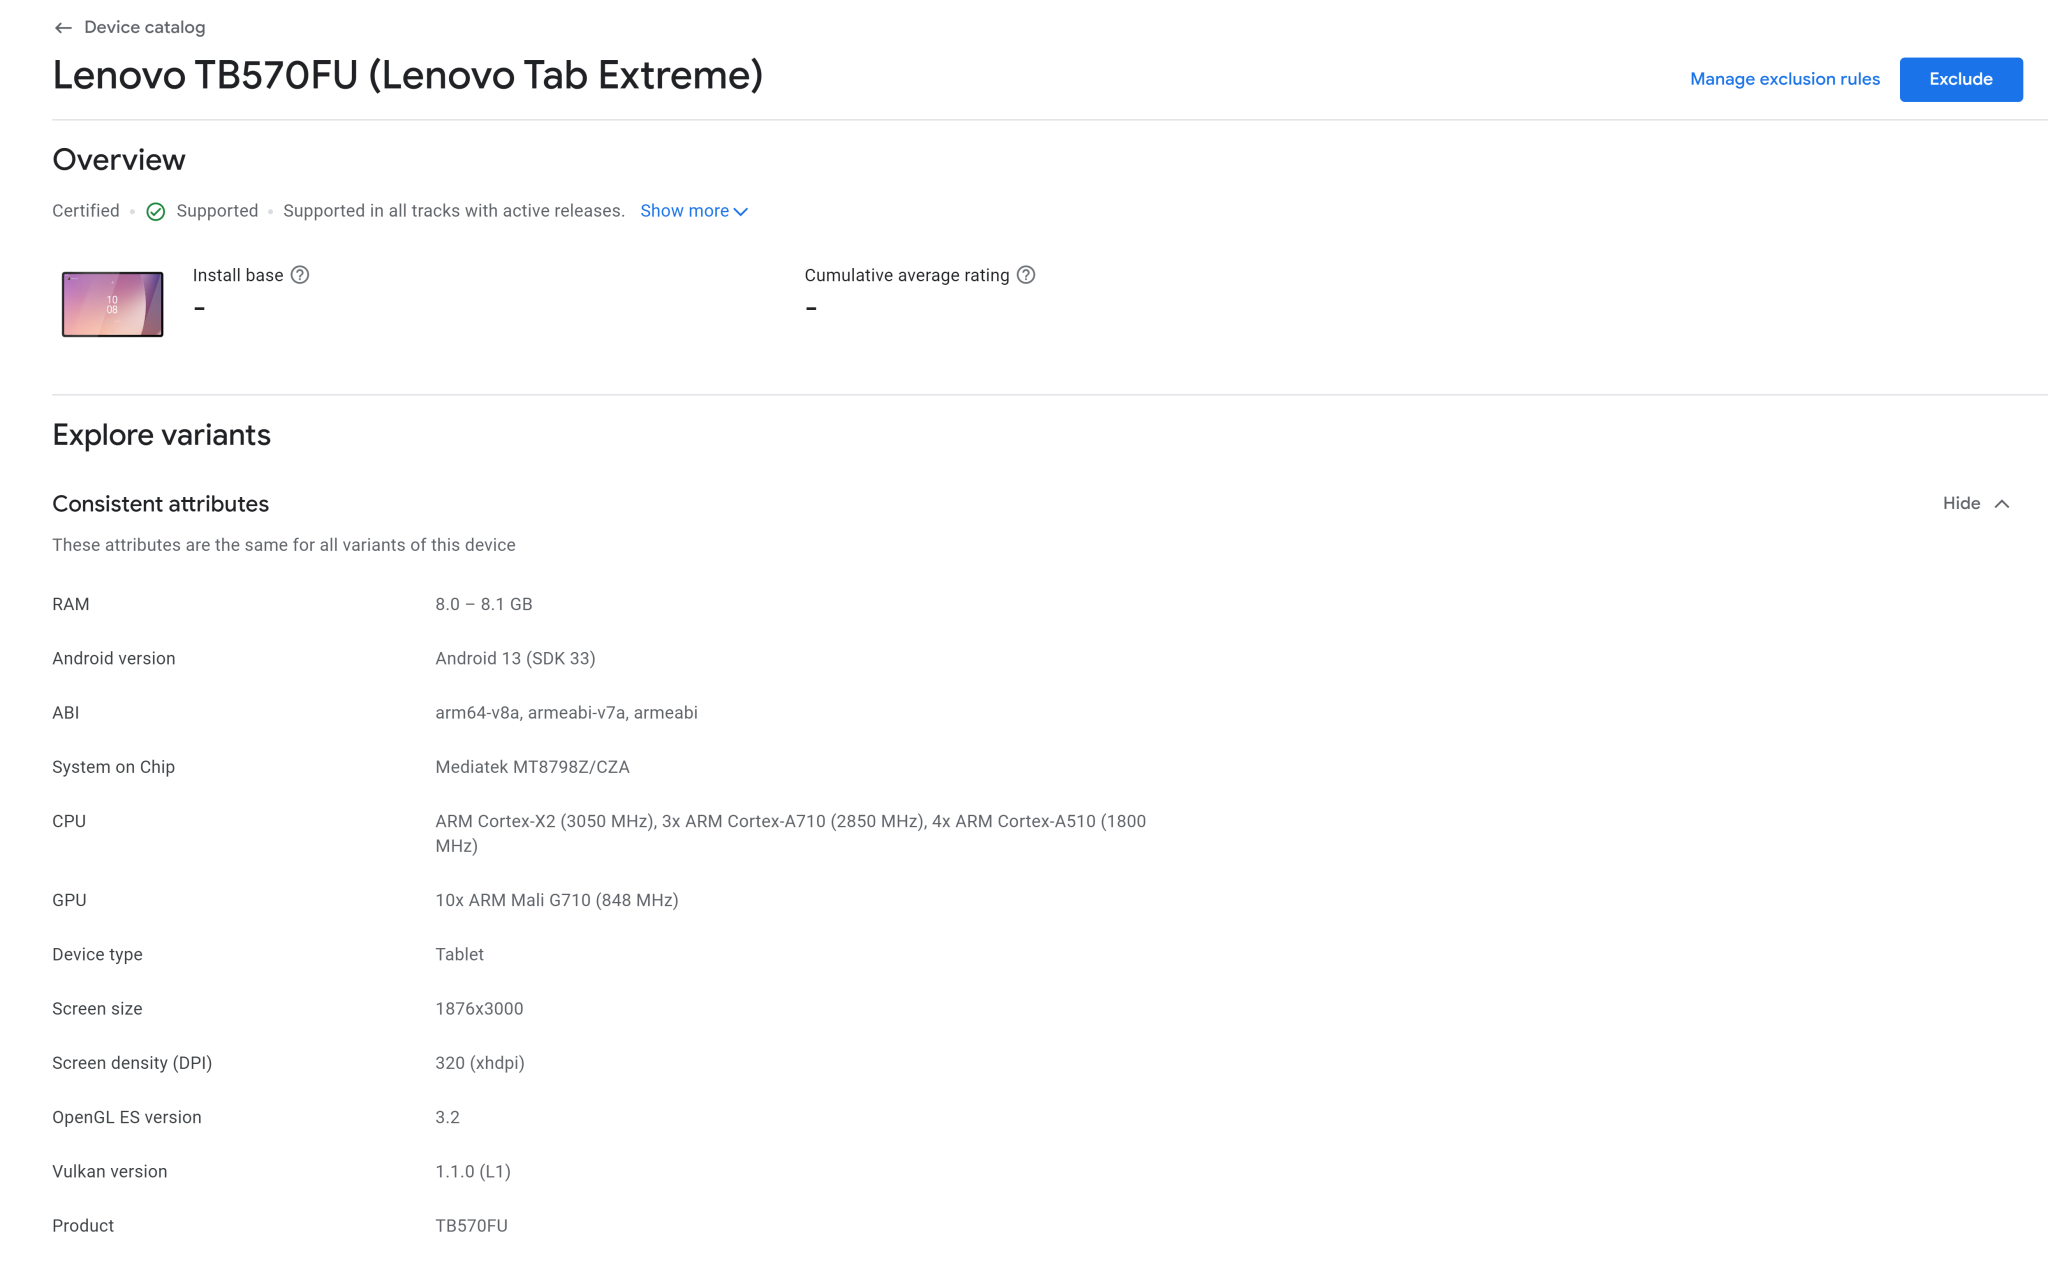 New high-end Lenovo tablet appears on the Google Play Console - PhoneArena